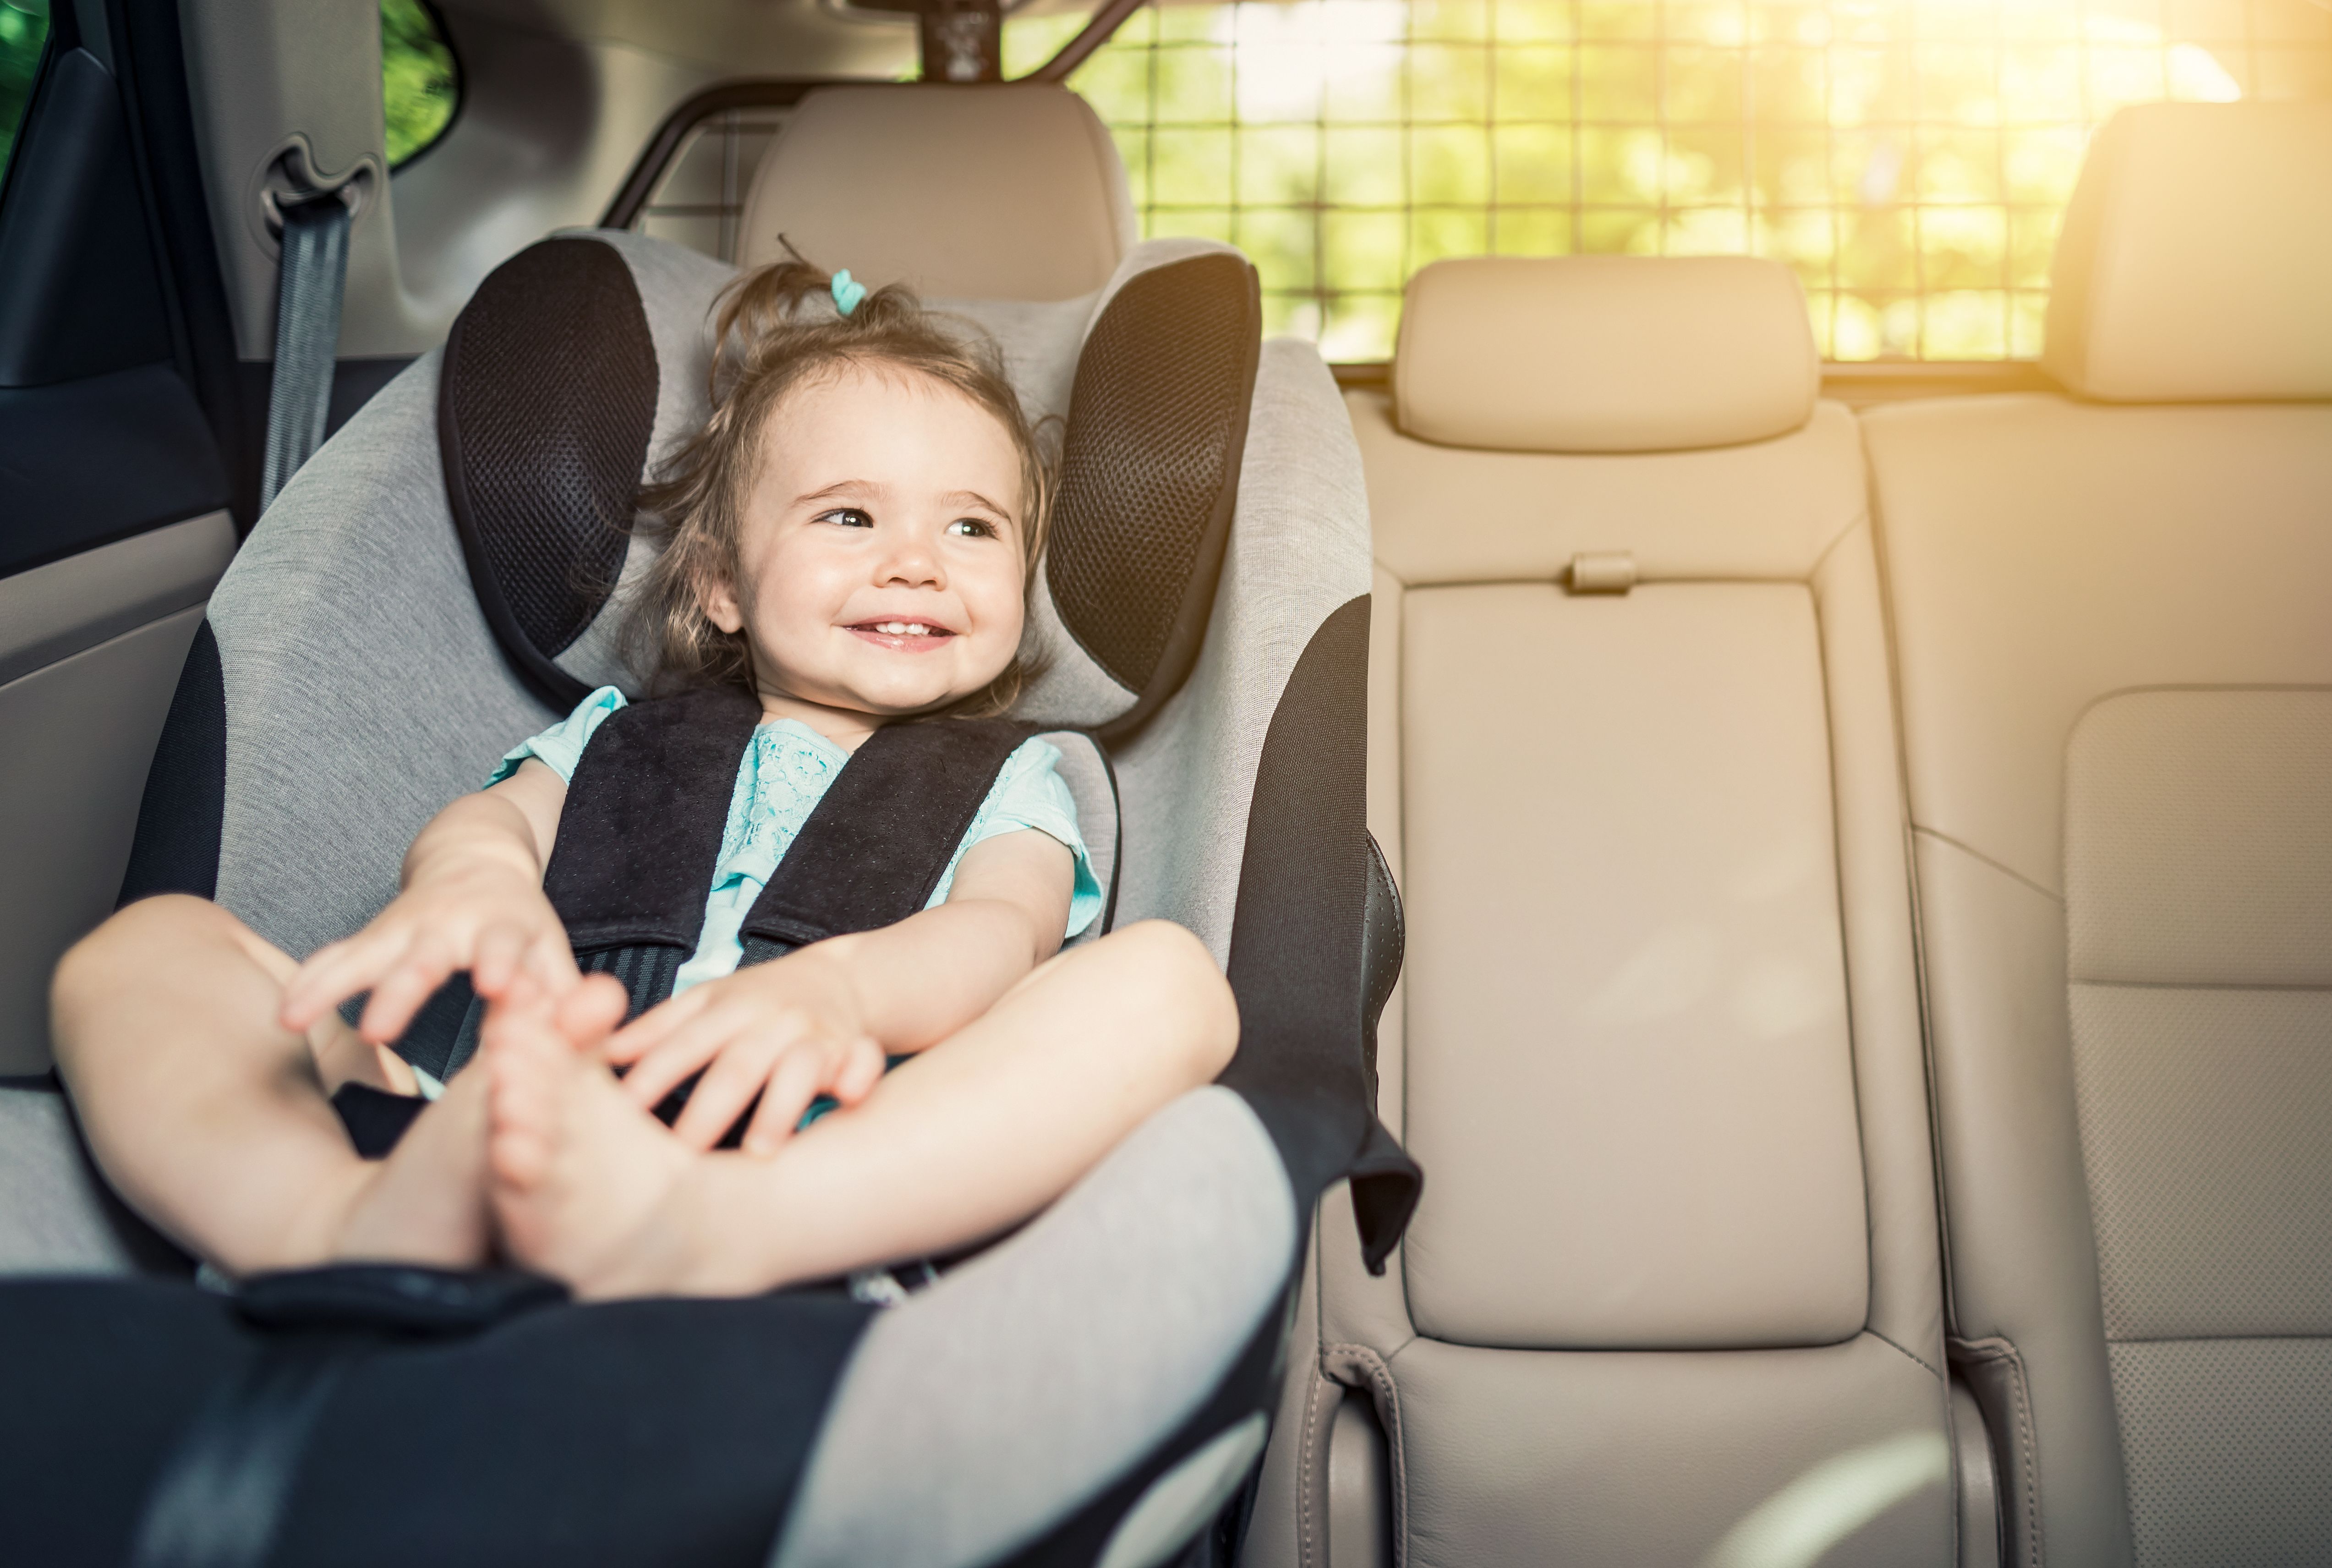 Car Seat Recycling Events, Where Do You Recycle Old Car Seats